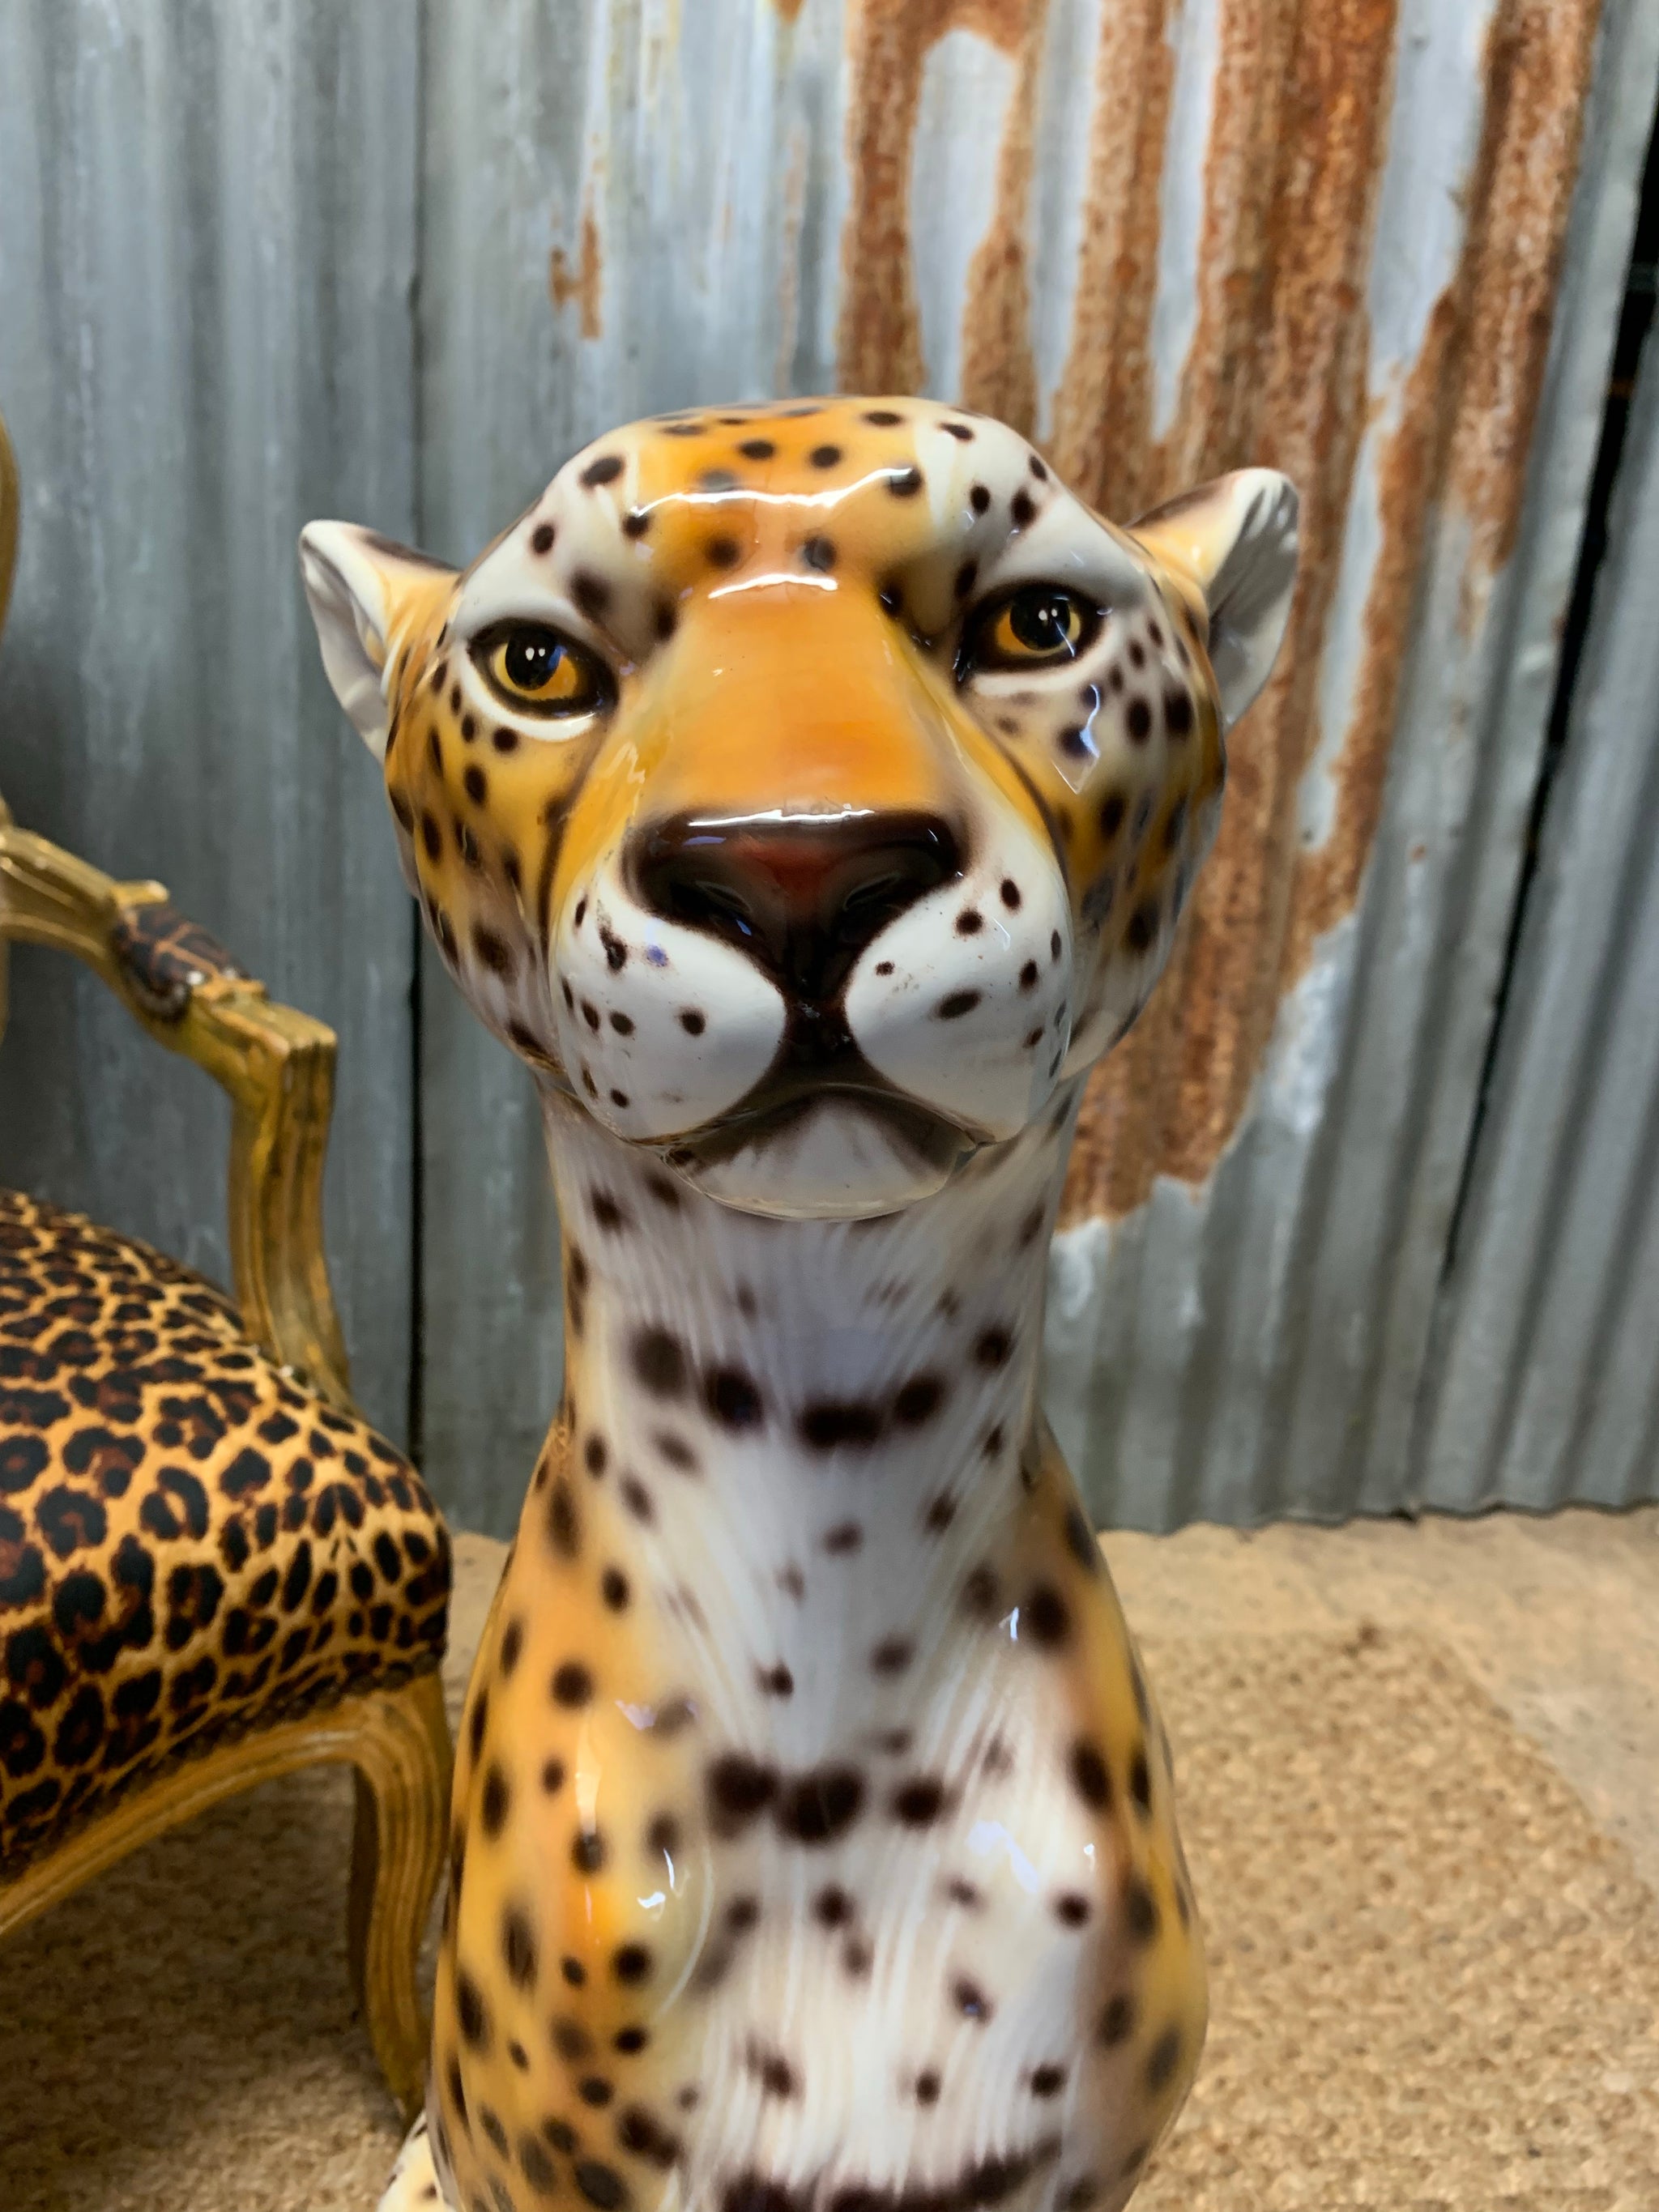 A very large mid 20th century cheetah statue - Belle and Beast Emporium